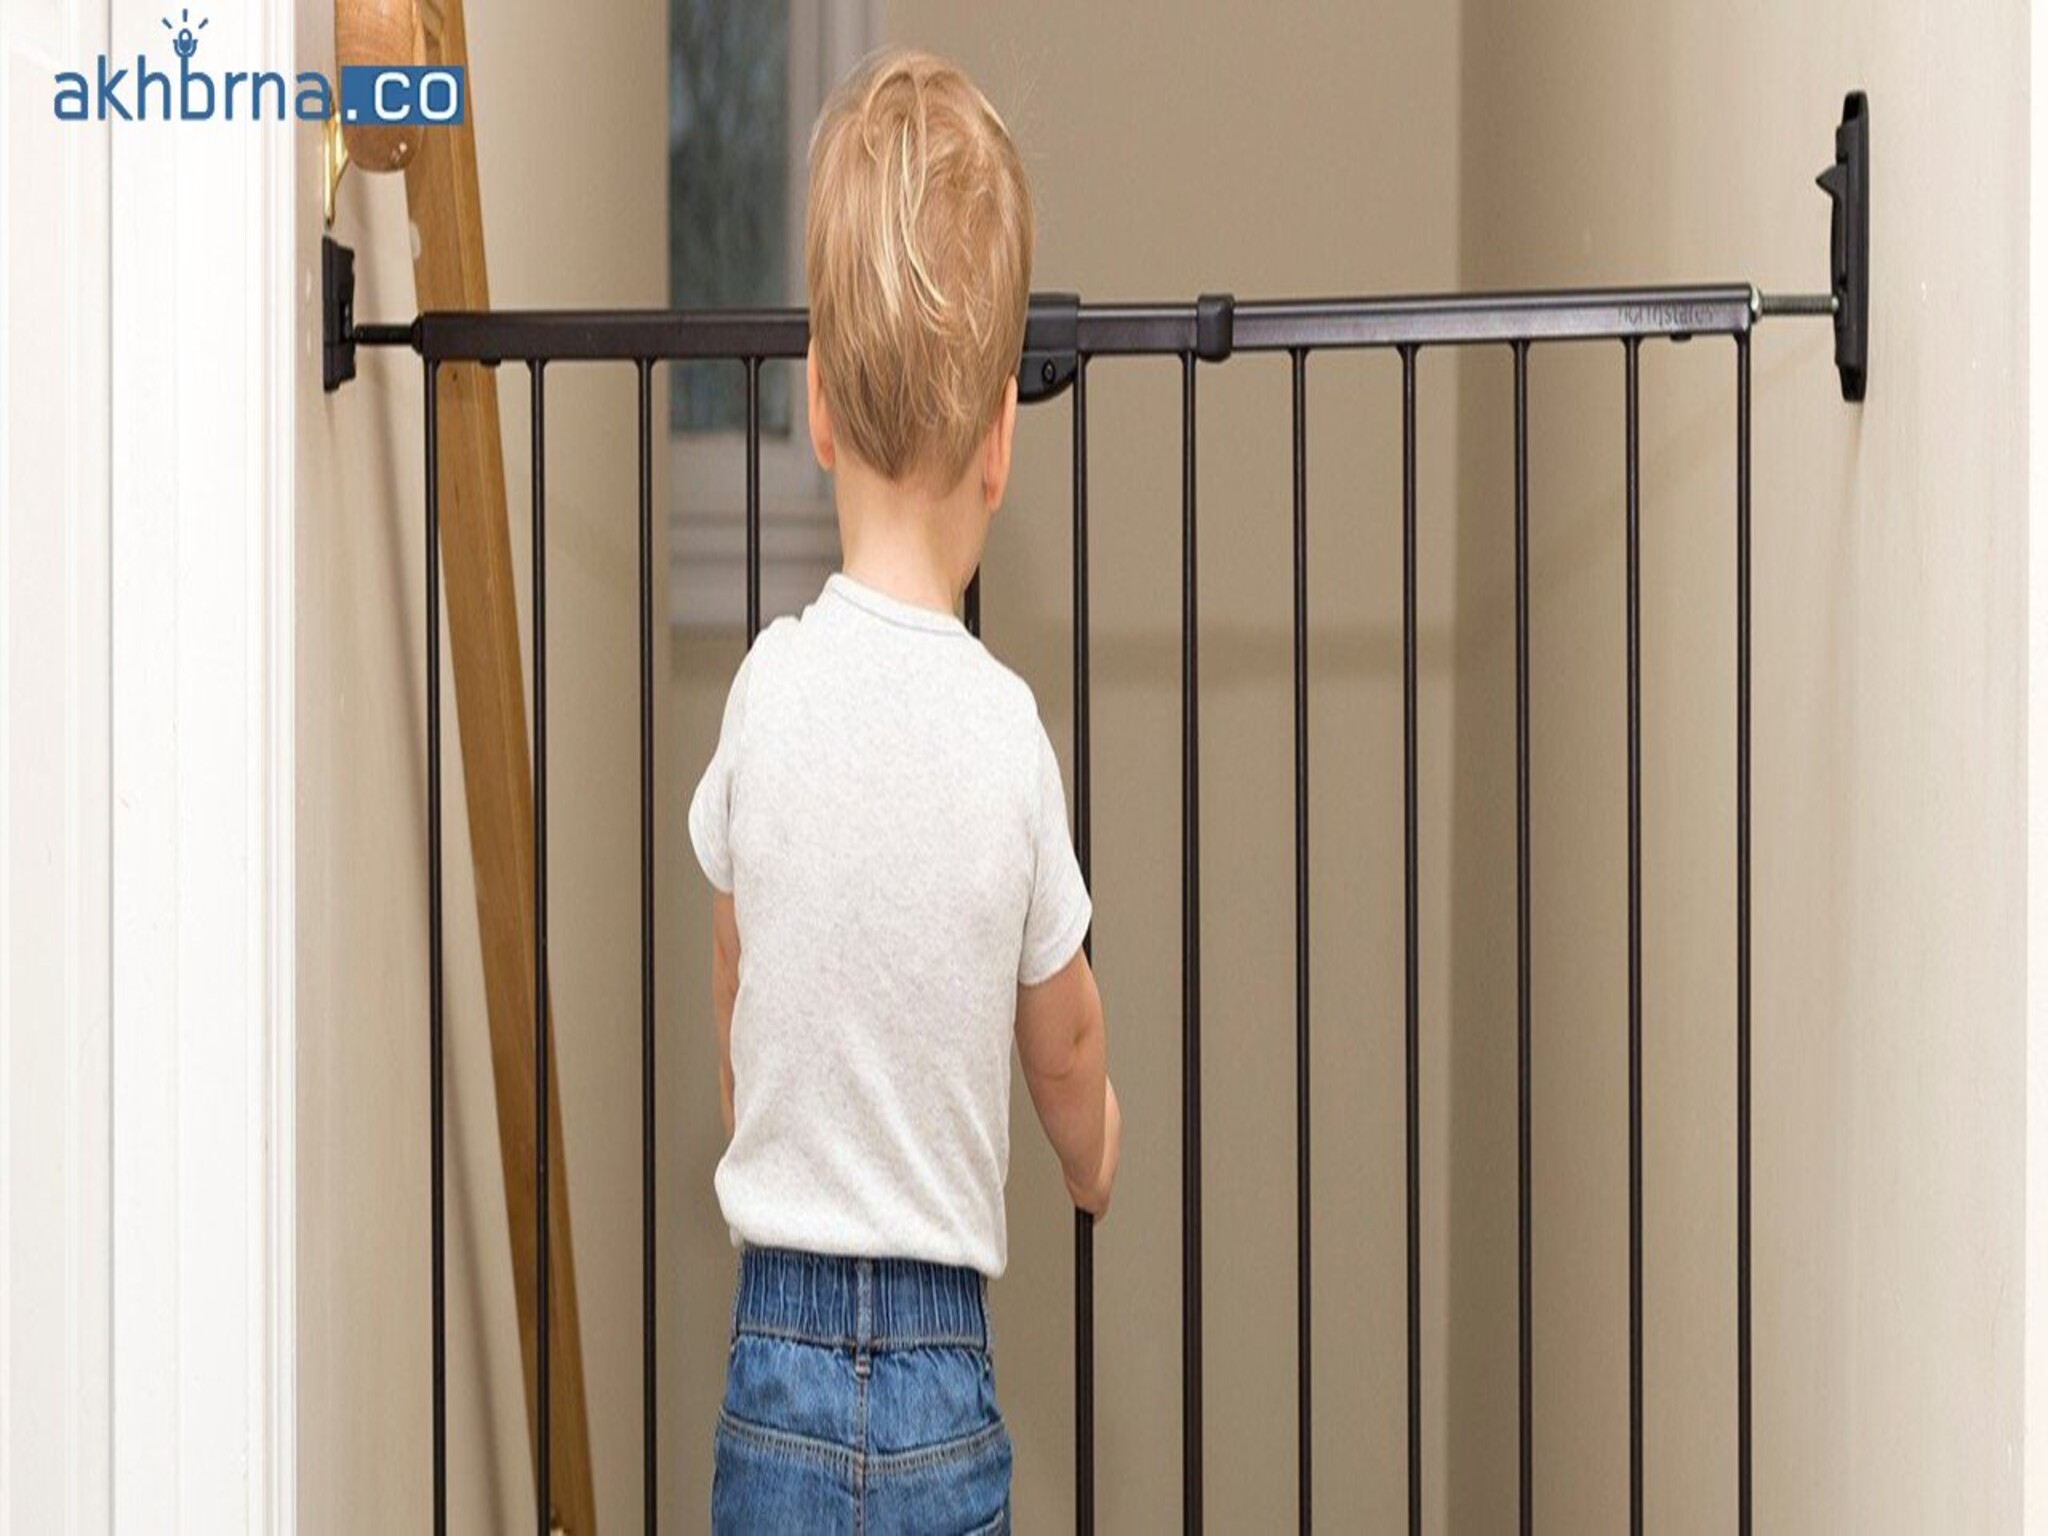 The UAE urges parents to install baby gates for child home safety